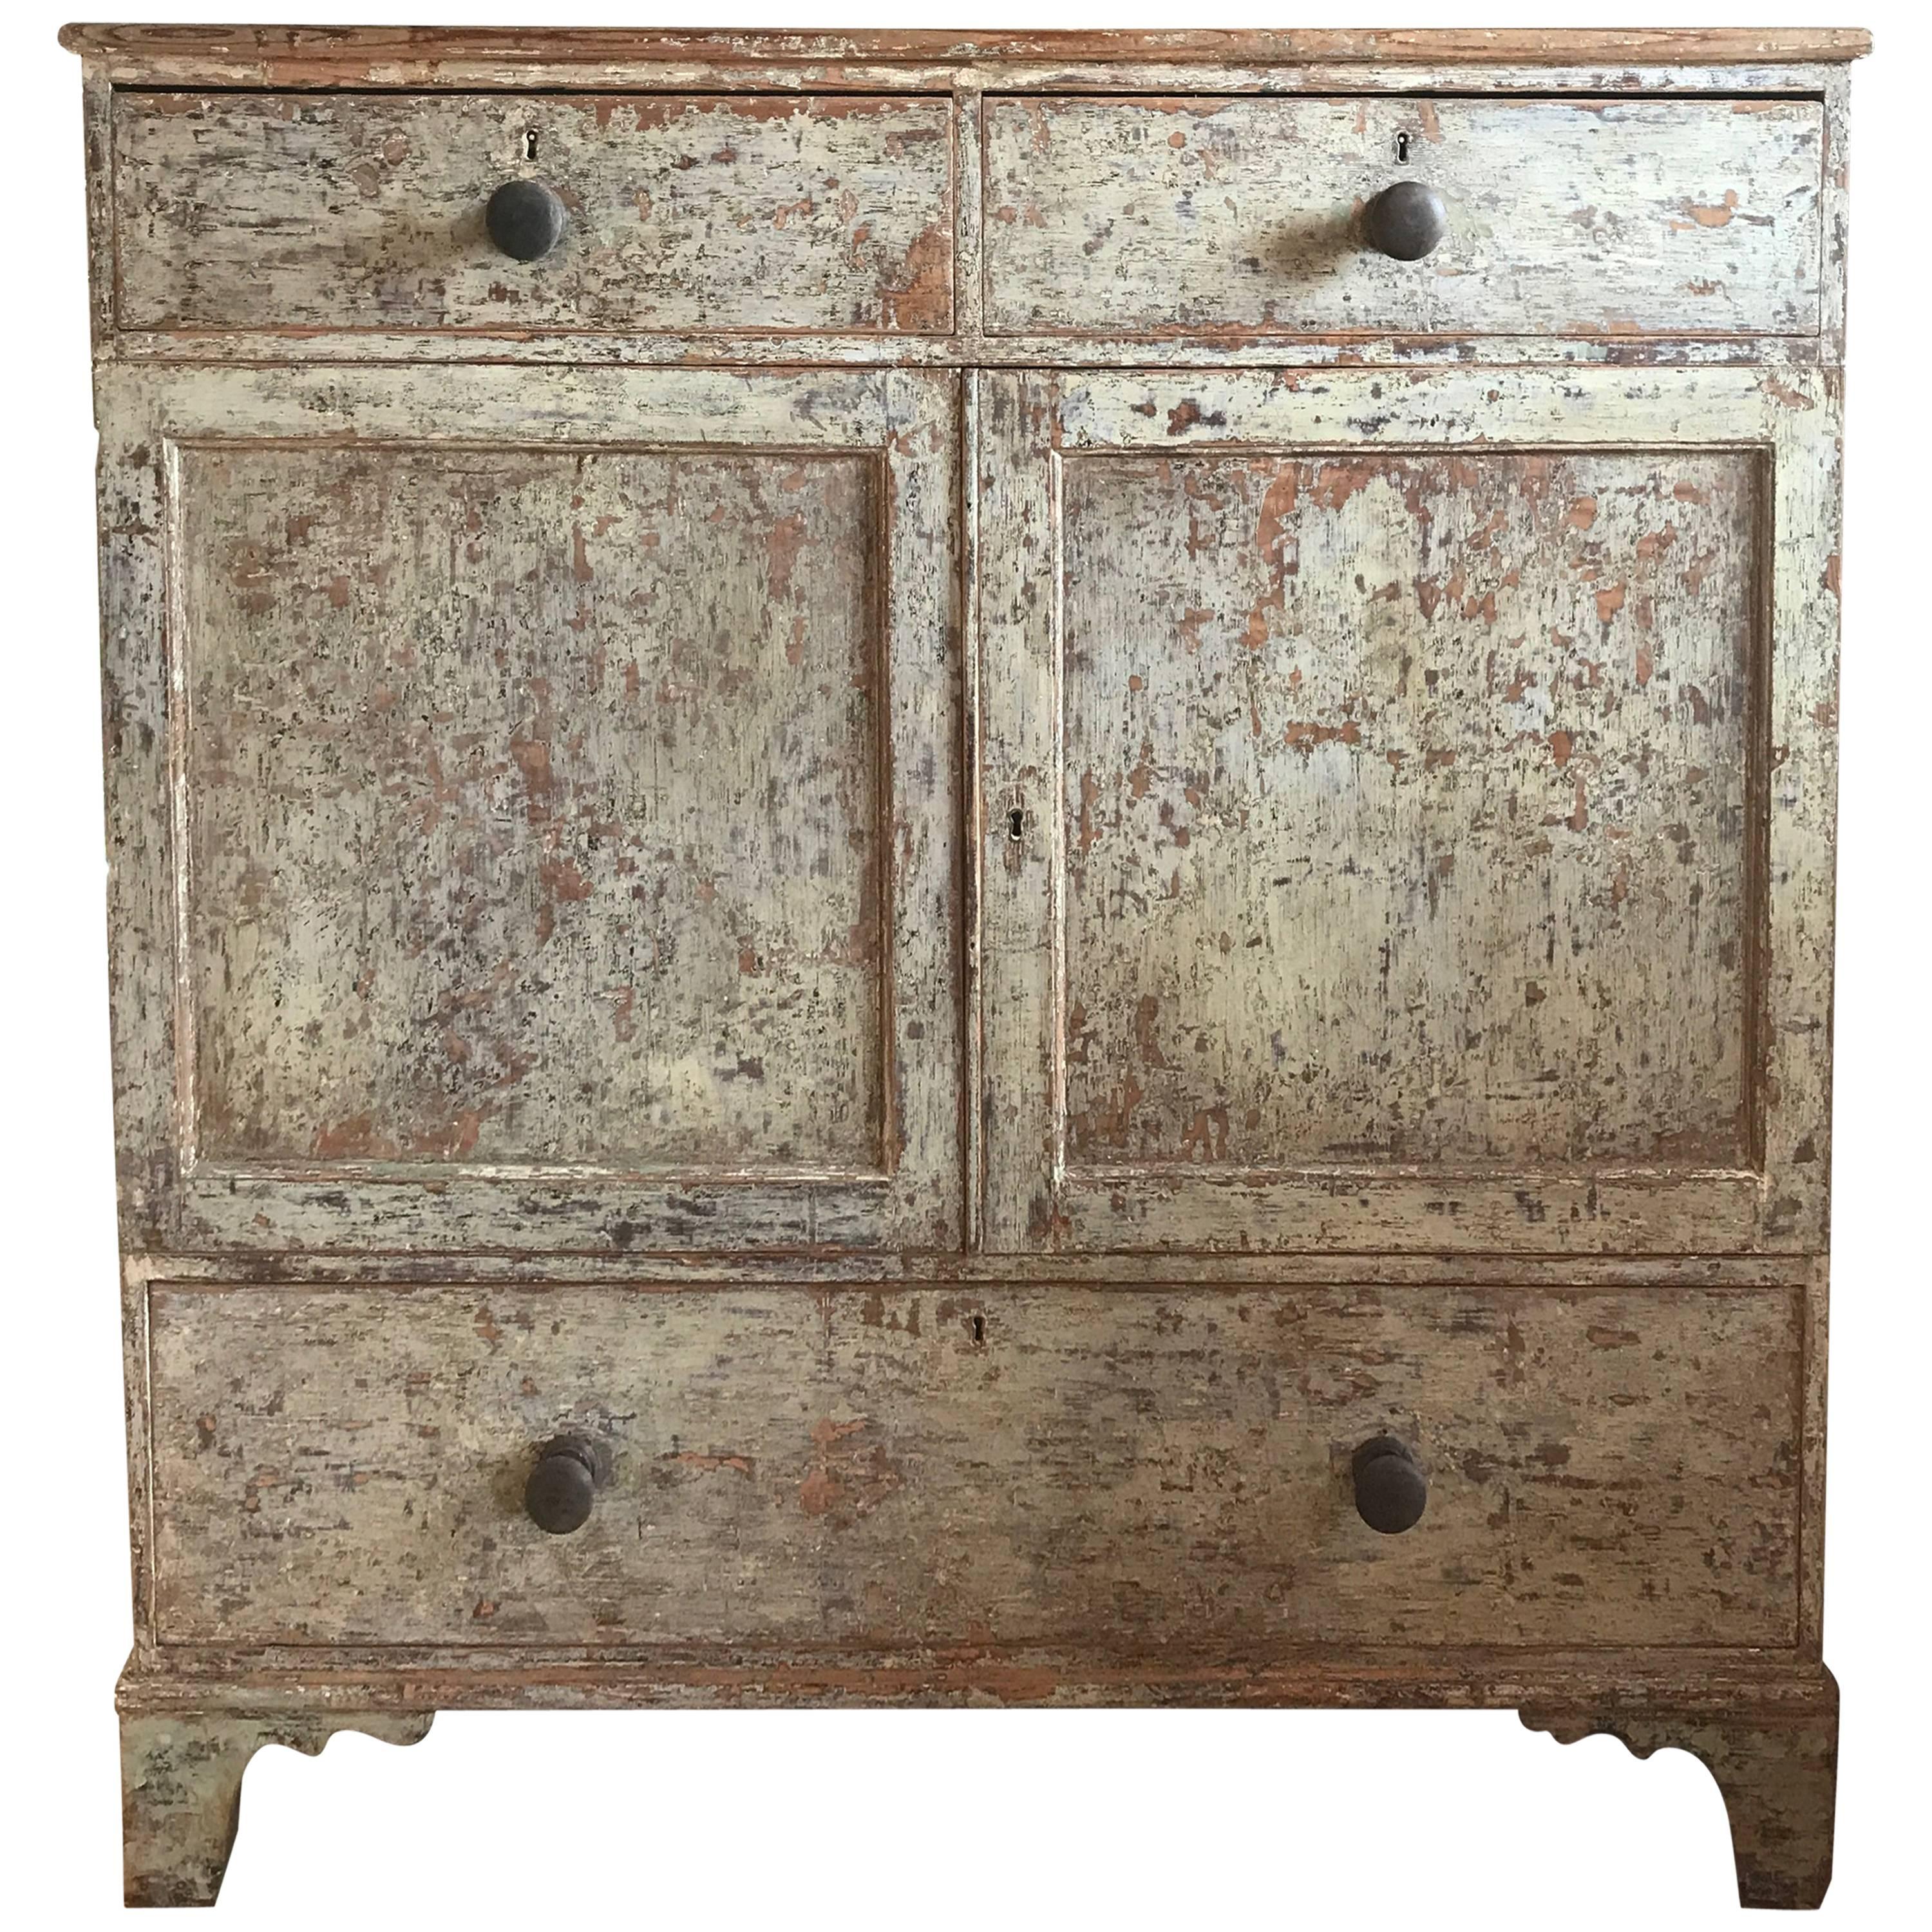 Mid-19th Century English North Country Linen Chest